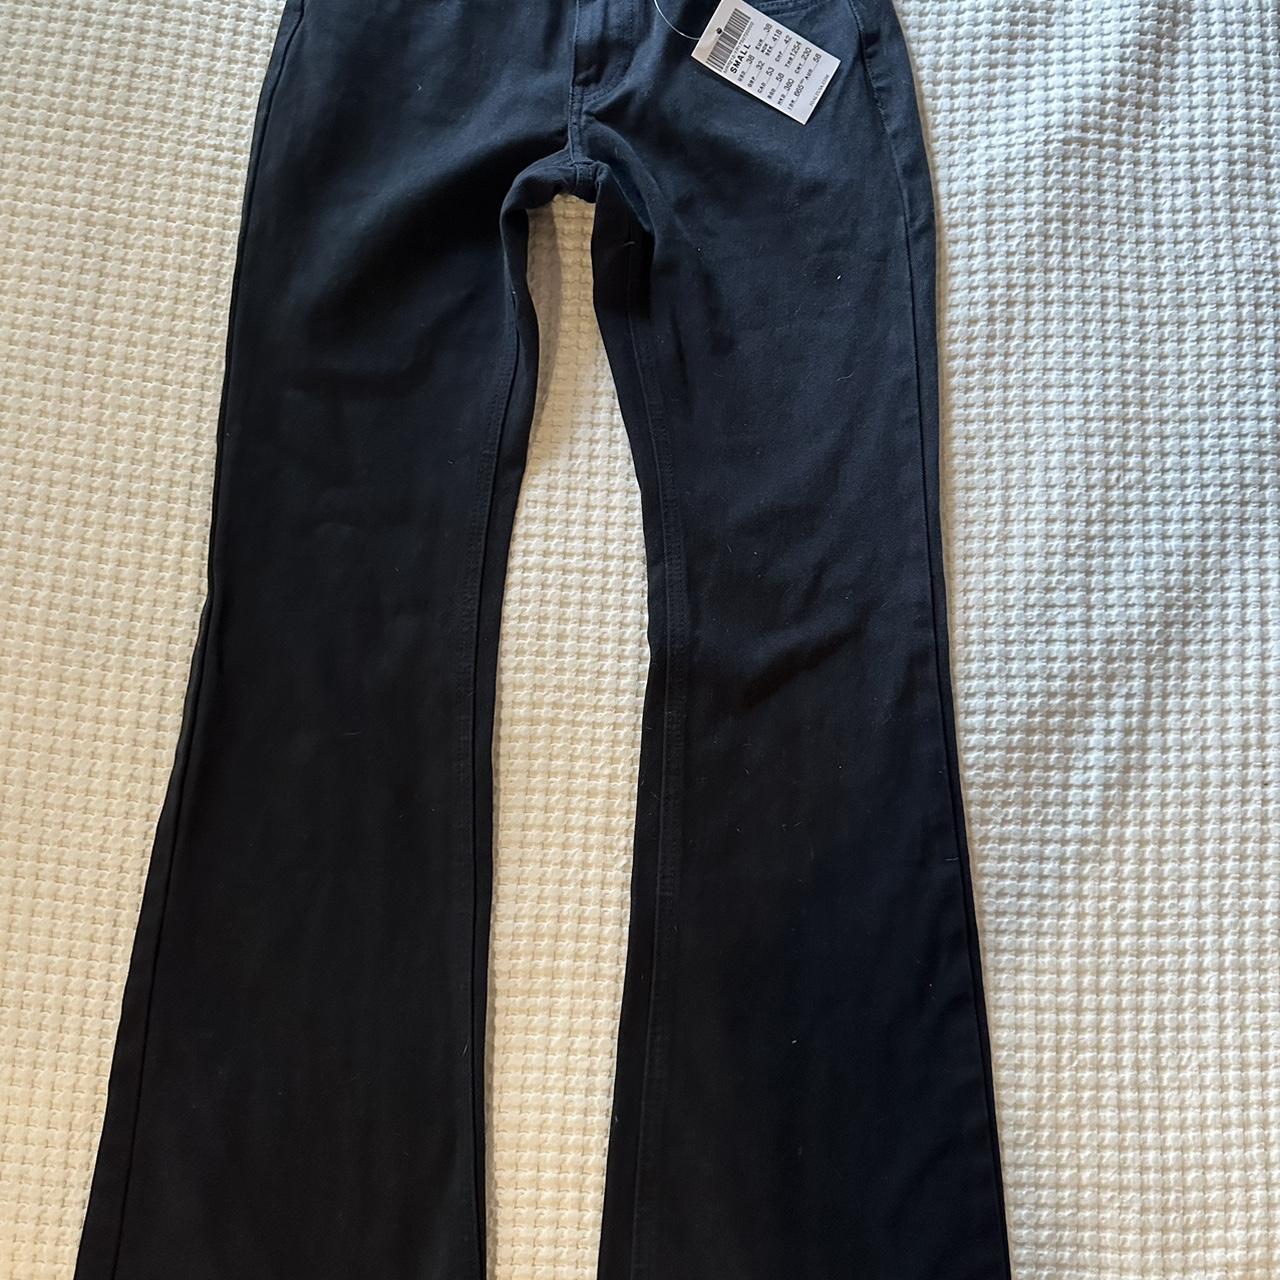 Brandy Melville Button Flare Jeans for Women